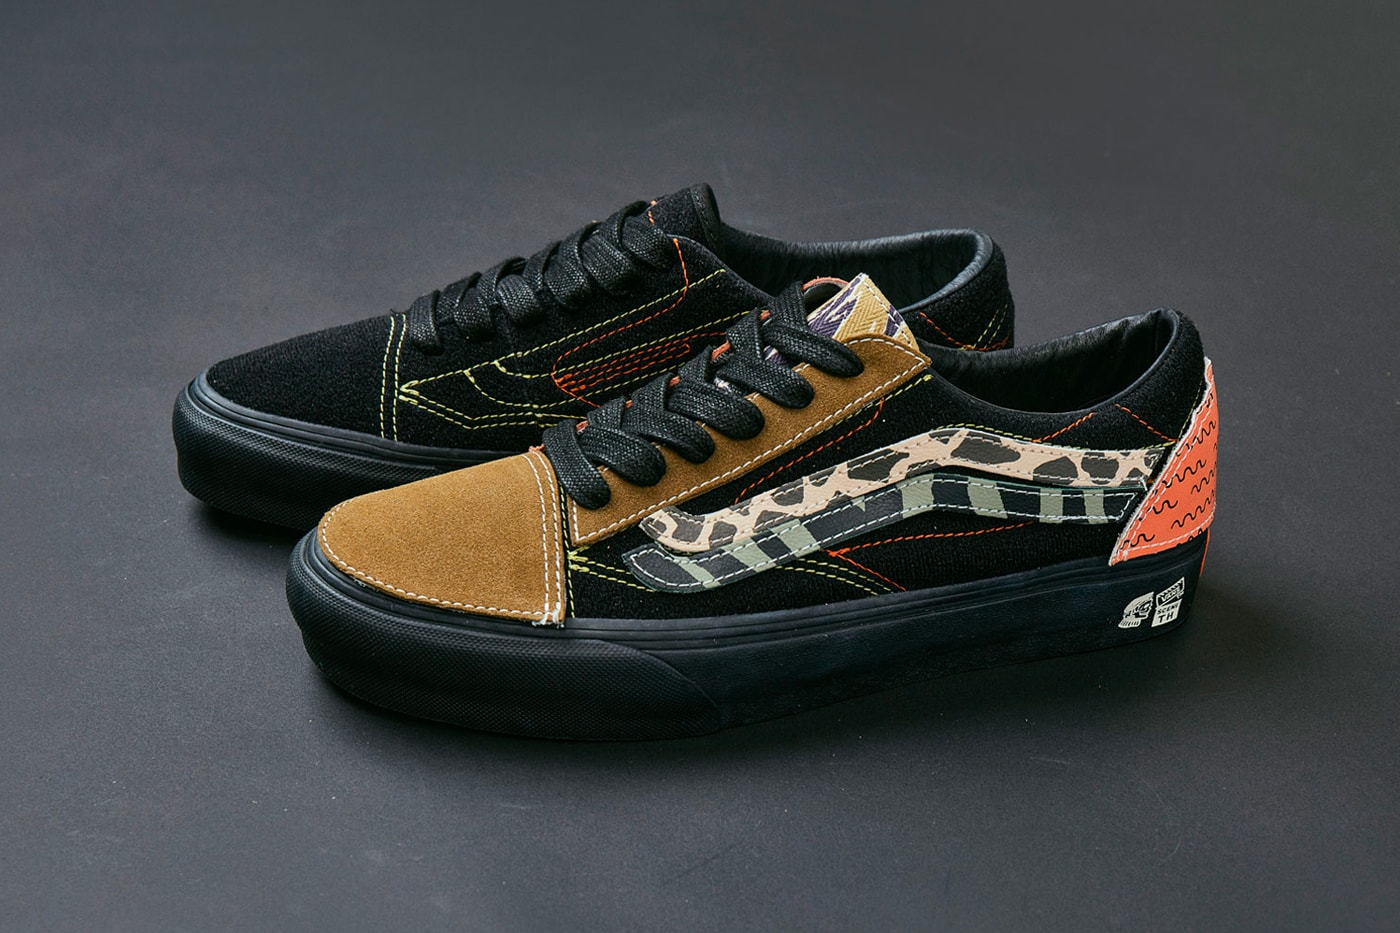 Vans Taka Hayashi Design It Yourself pack footwear shoes sneakers menswear fall winter 2020 collection fw20 kicks trainers runners 